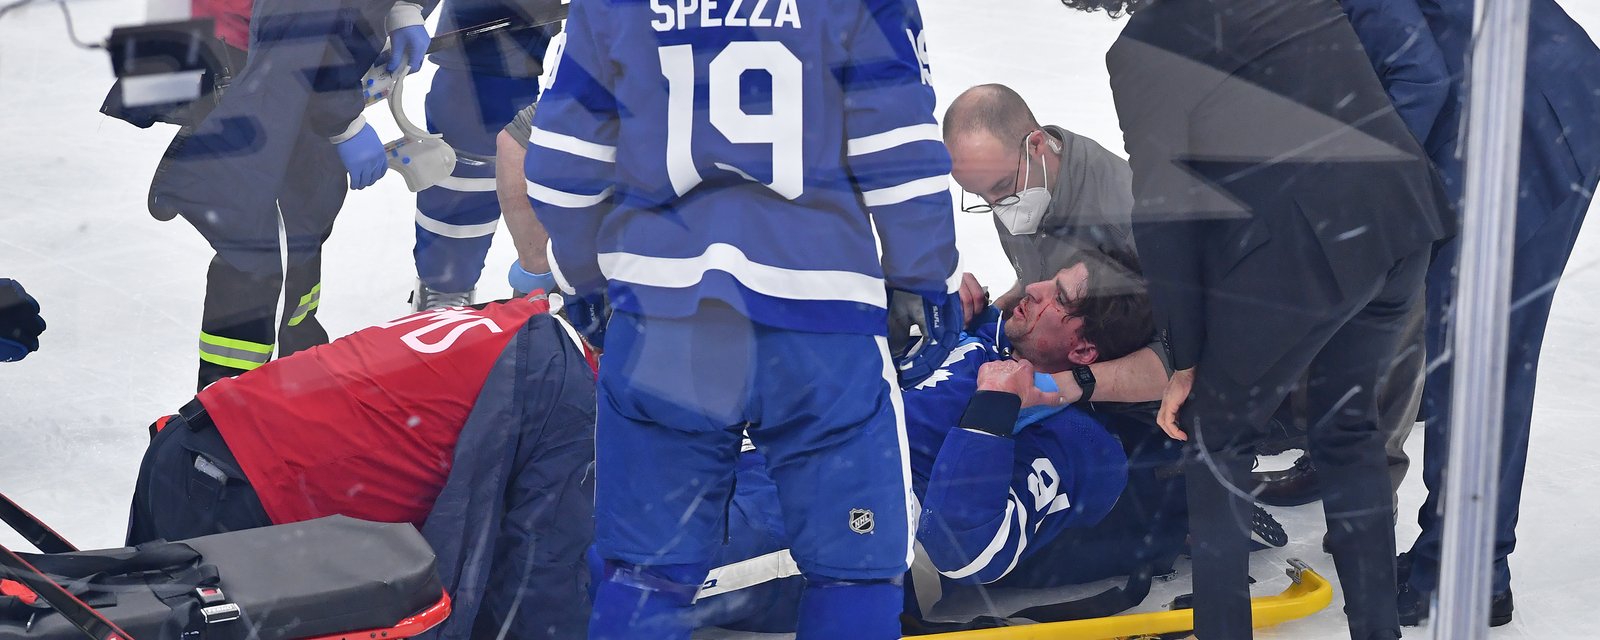 Spezza shares scary details as he attended to Tavares following brutal hit 